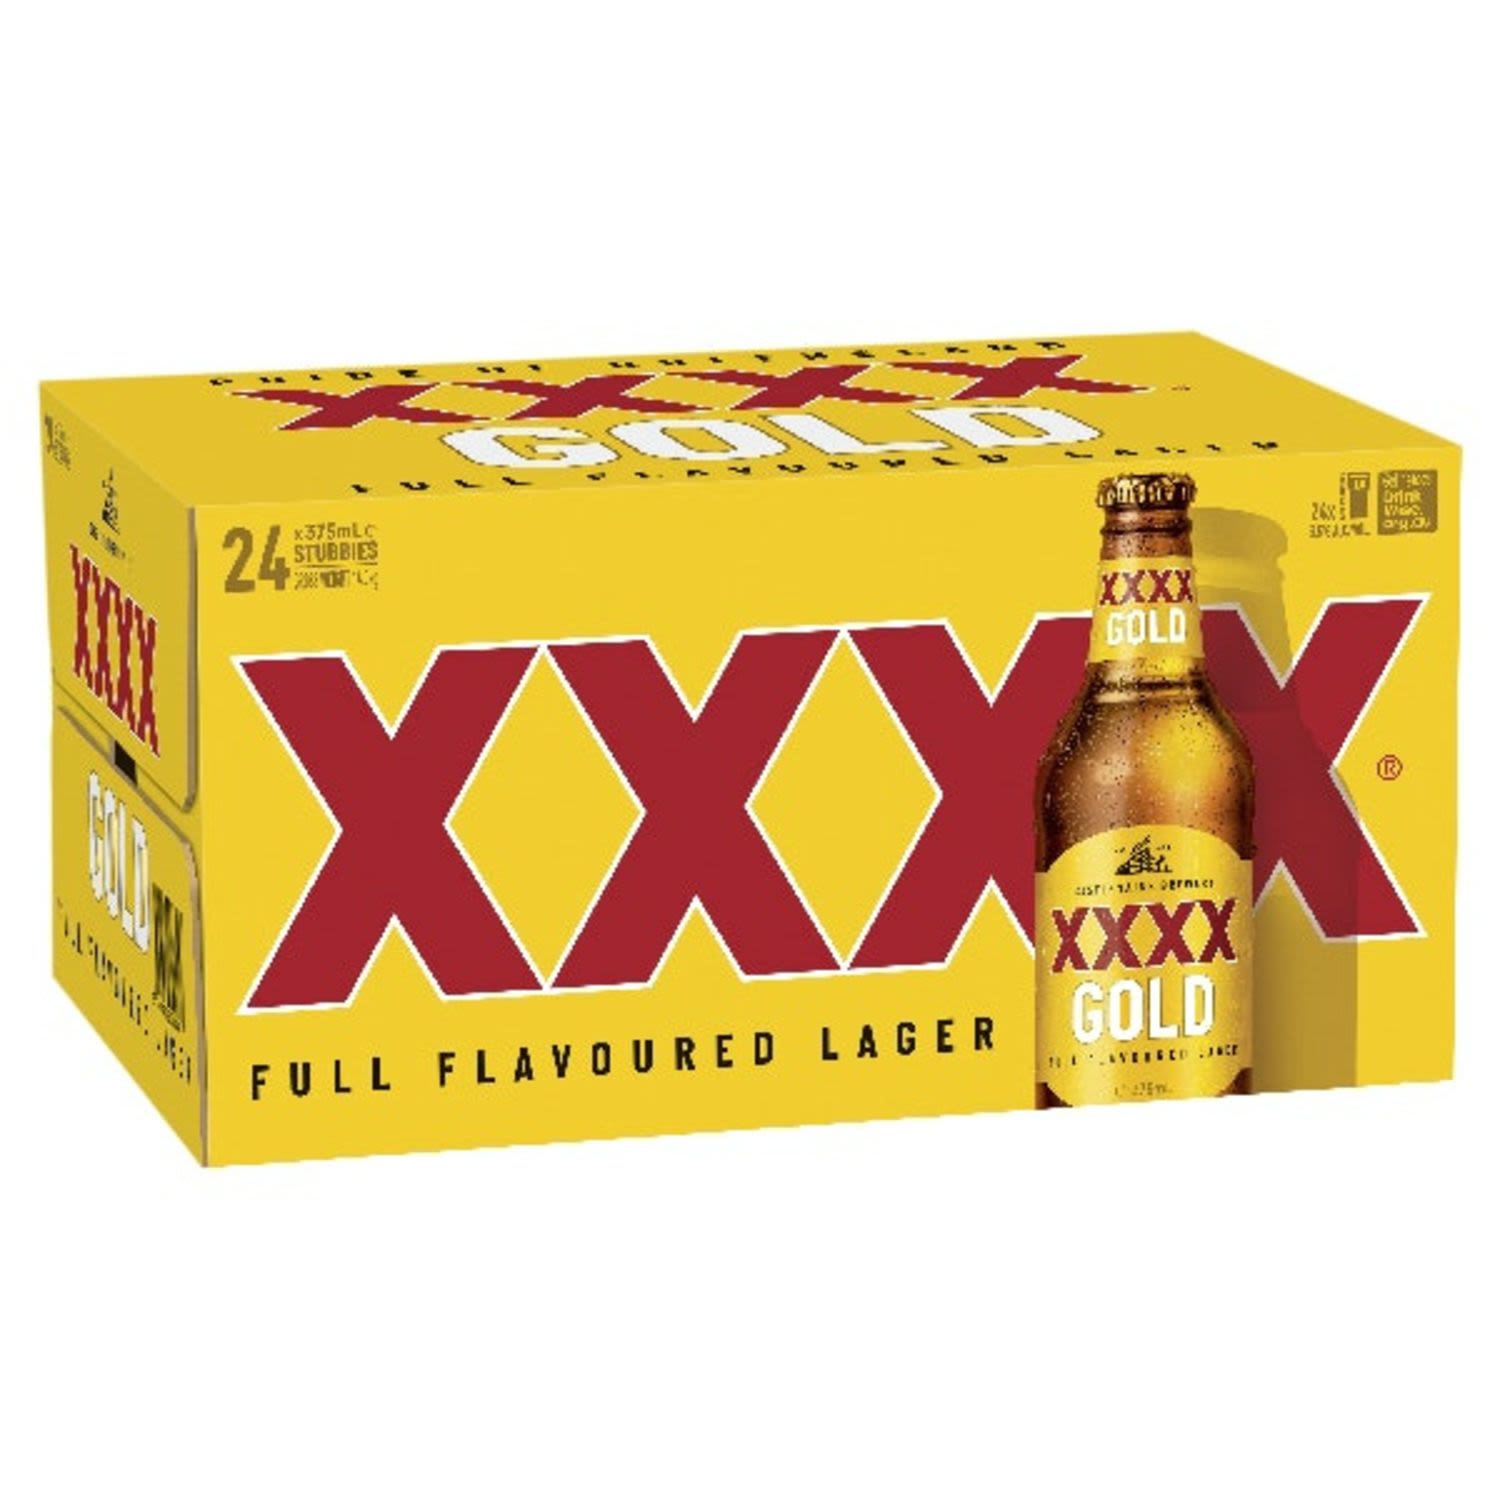 XXXX Gold is a refreshing mid-strength beer that continues the great tradition of XXXX brewing heritage, by being brewed with the finest Australian malt, barley and unique golden cluster hops. XXXX Gold has a balanced, smooth flavour and body, complimented by mild bitterness and a trace of sweetness from the extra malt.<br /> <br />Alcohol Volume: 3.50%<br /><br />Pack Format: 24 Pack<br /><br />Standard Drinks: 1</br /><br />Pack Type: Bottle<br /><br />Country of Origin: Australia<br />